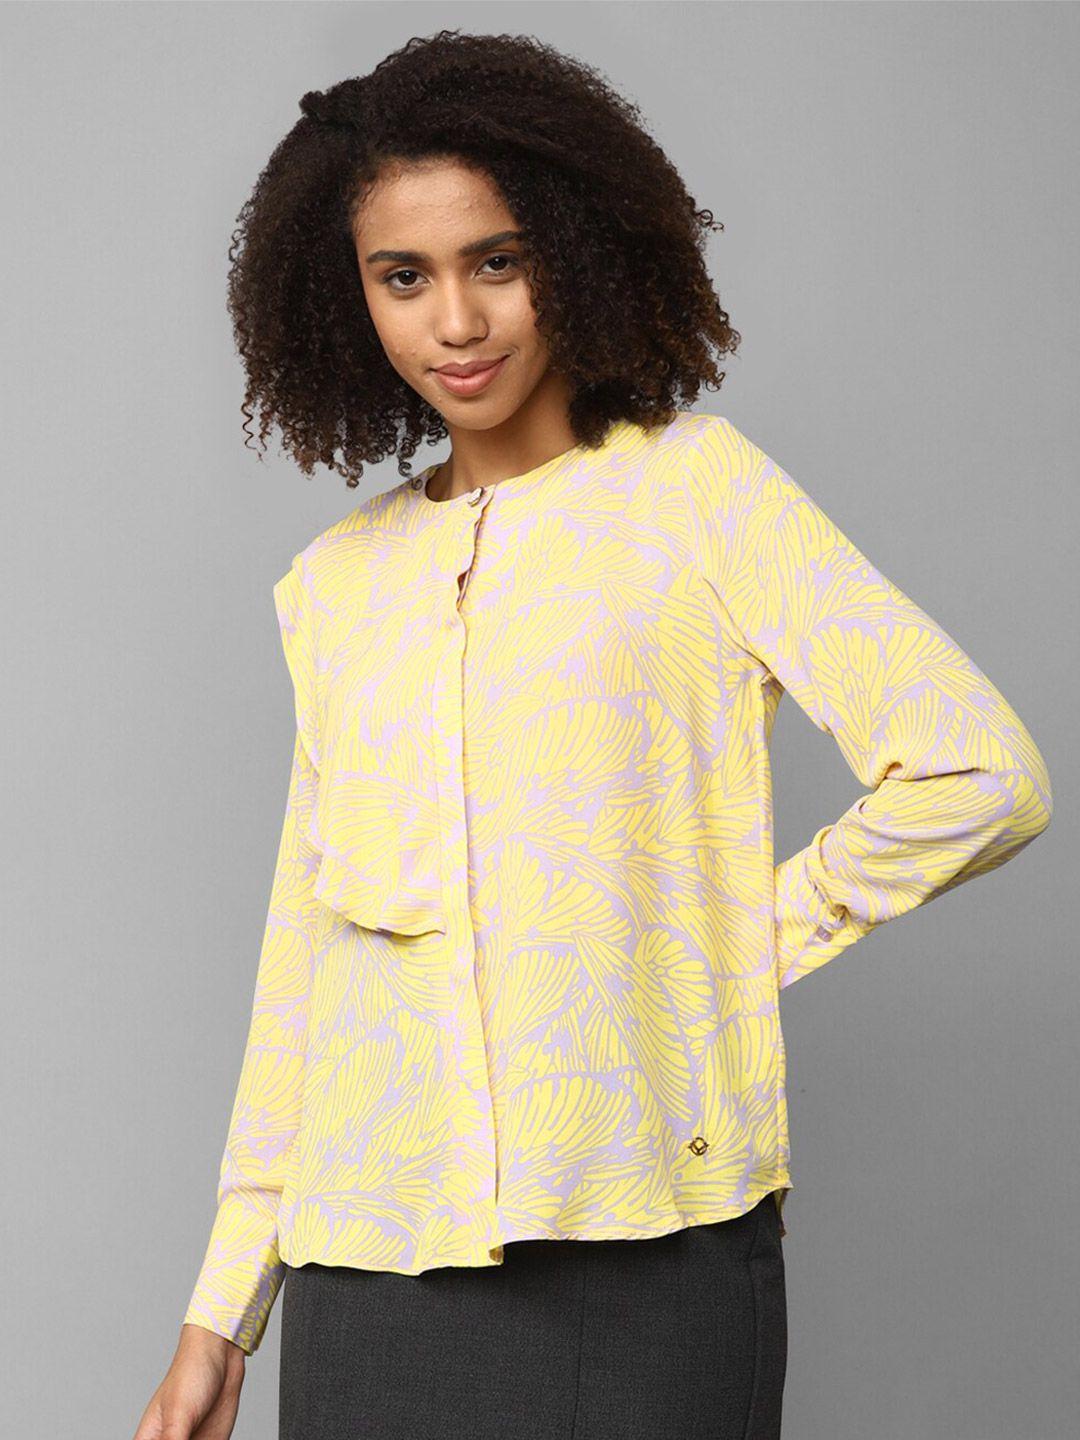 allen solly woman abstract printed shirt style top